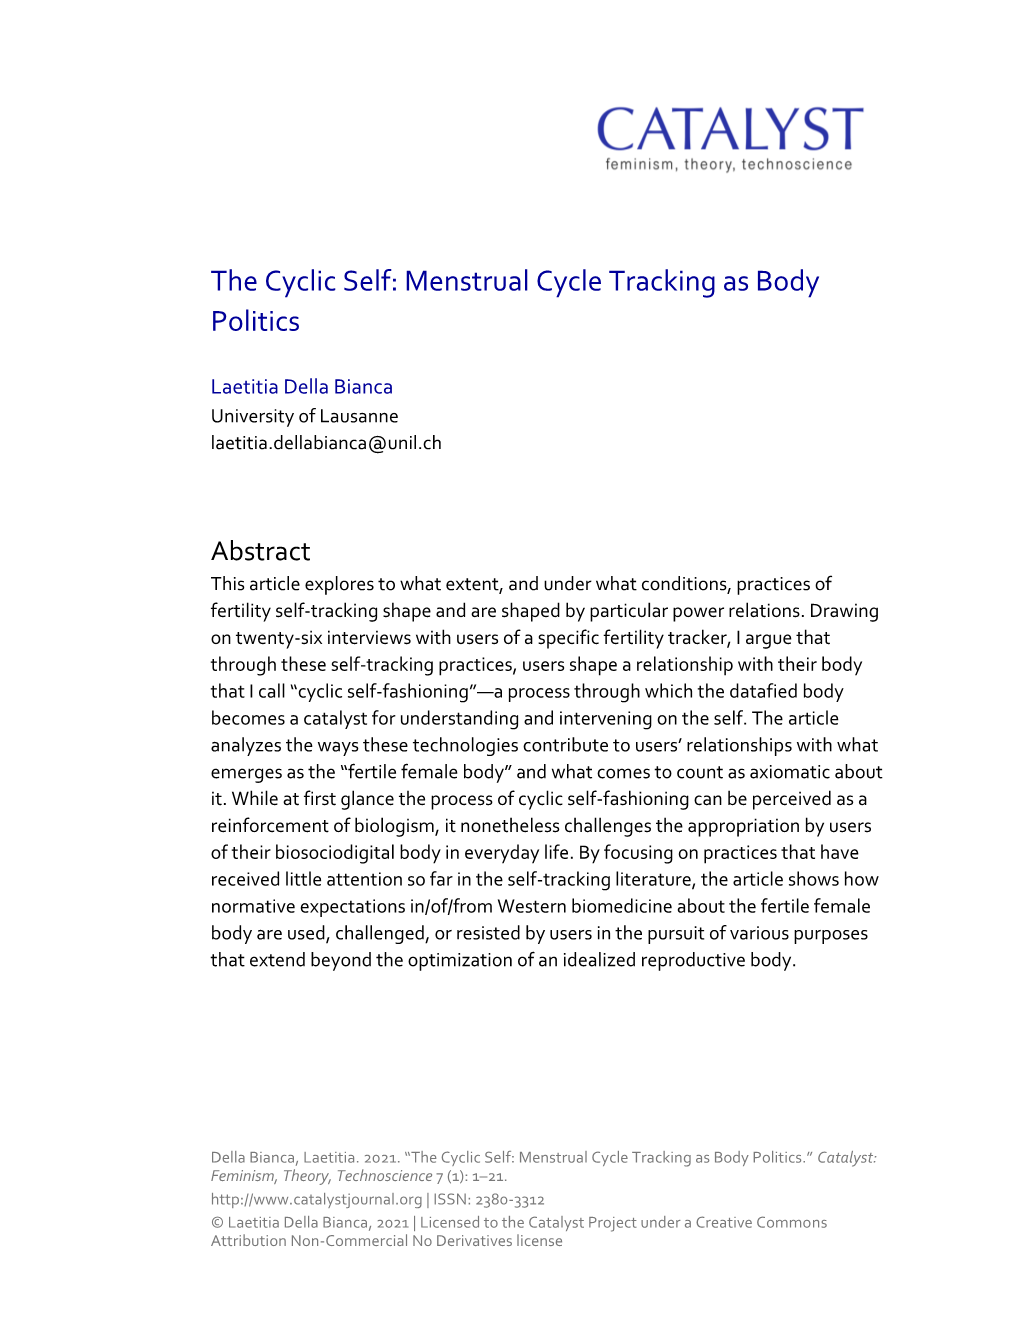 Menstrual Cycle Tracking As Body Politics